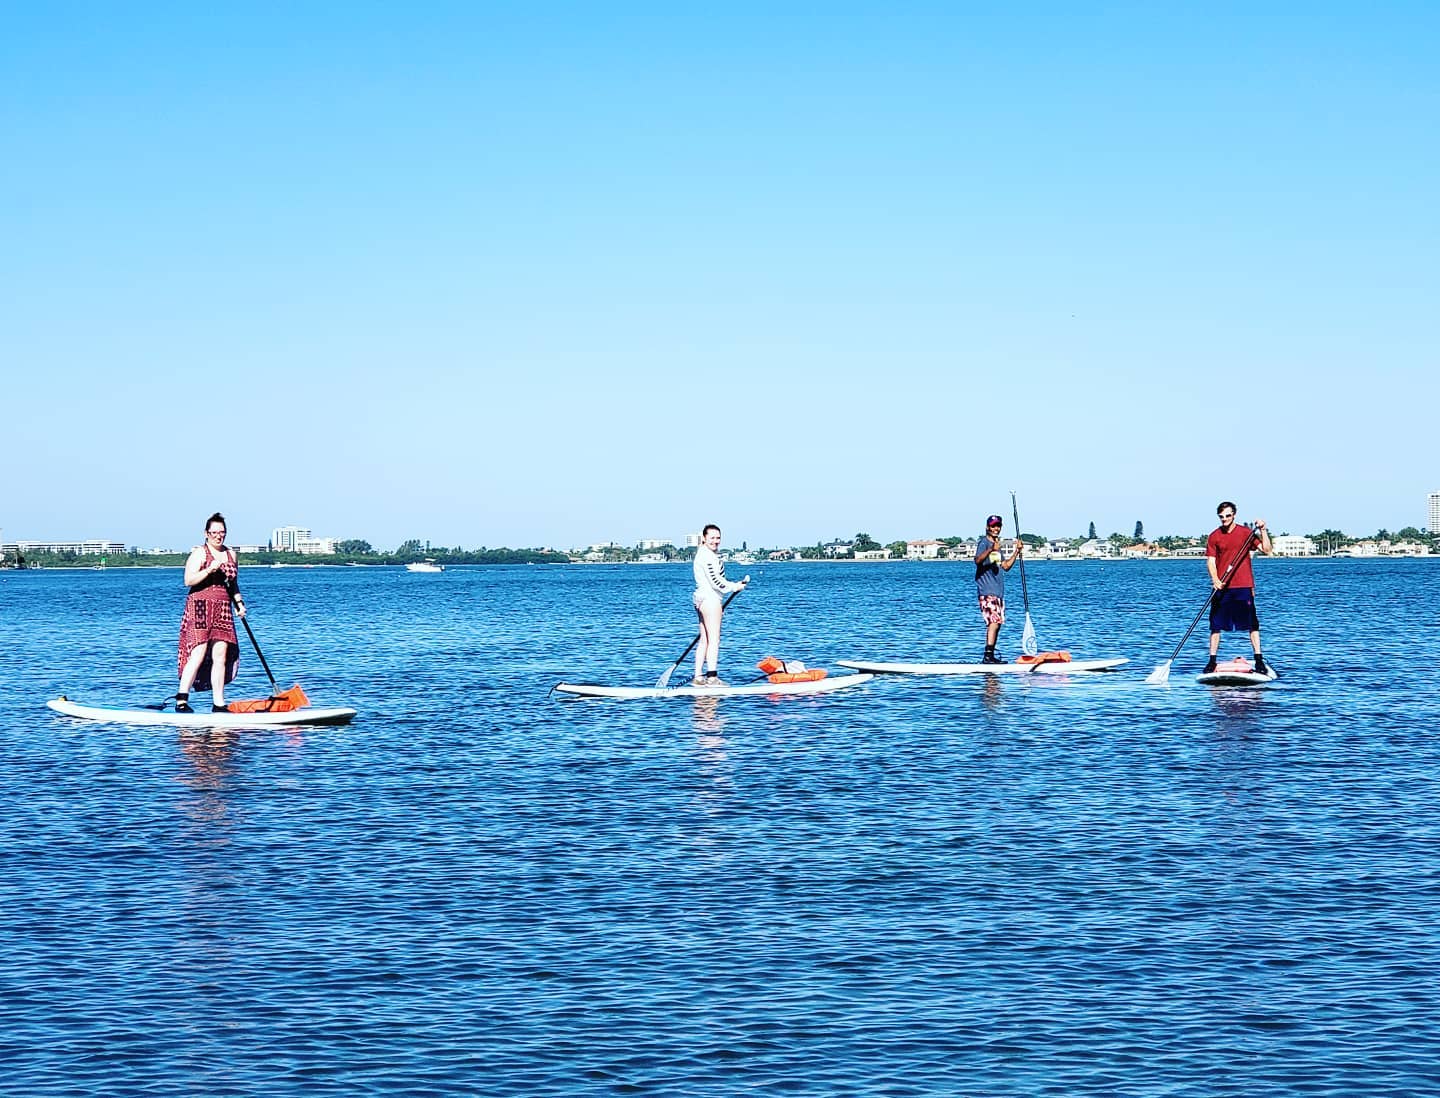 Lots of dolphin encounters this week!  #siestakeypaddleboards @siestakeypaddleboards #siestakey #siesta #sarasota